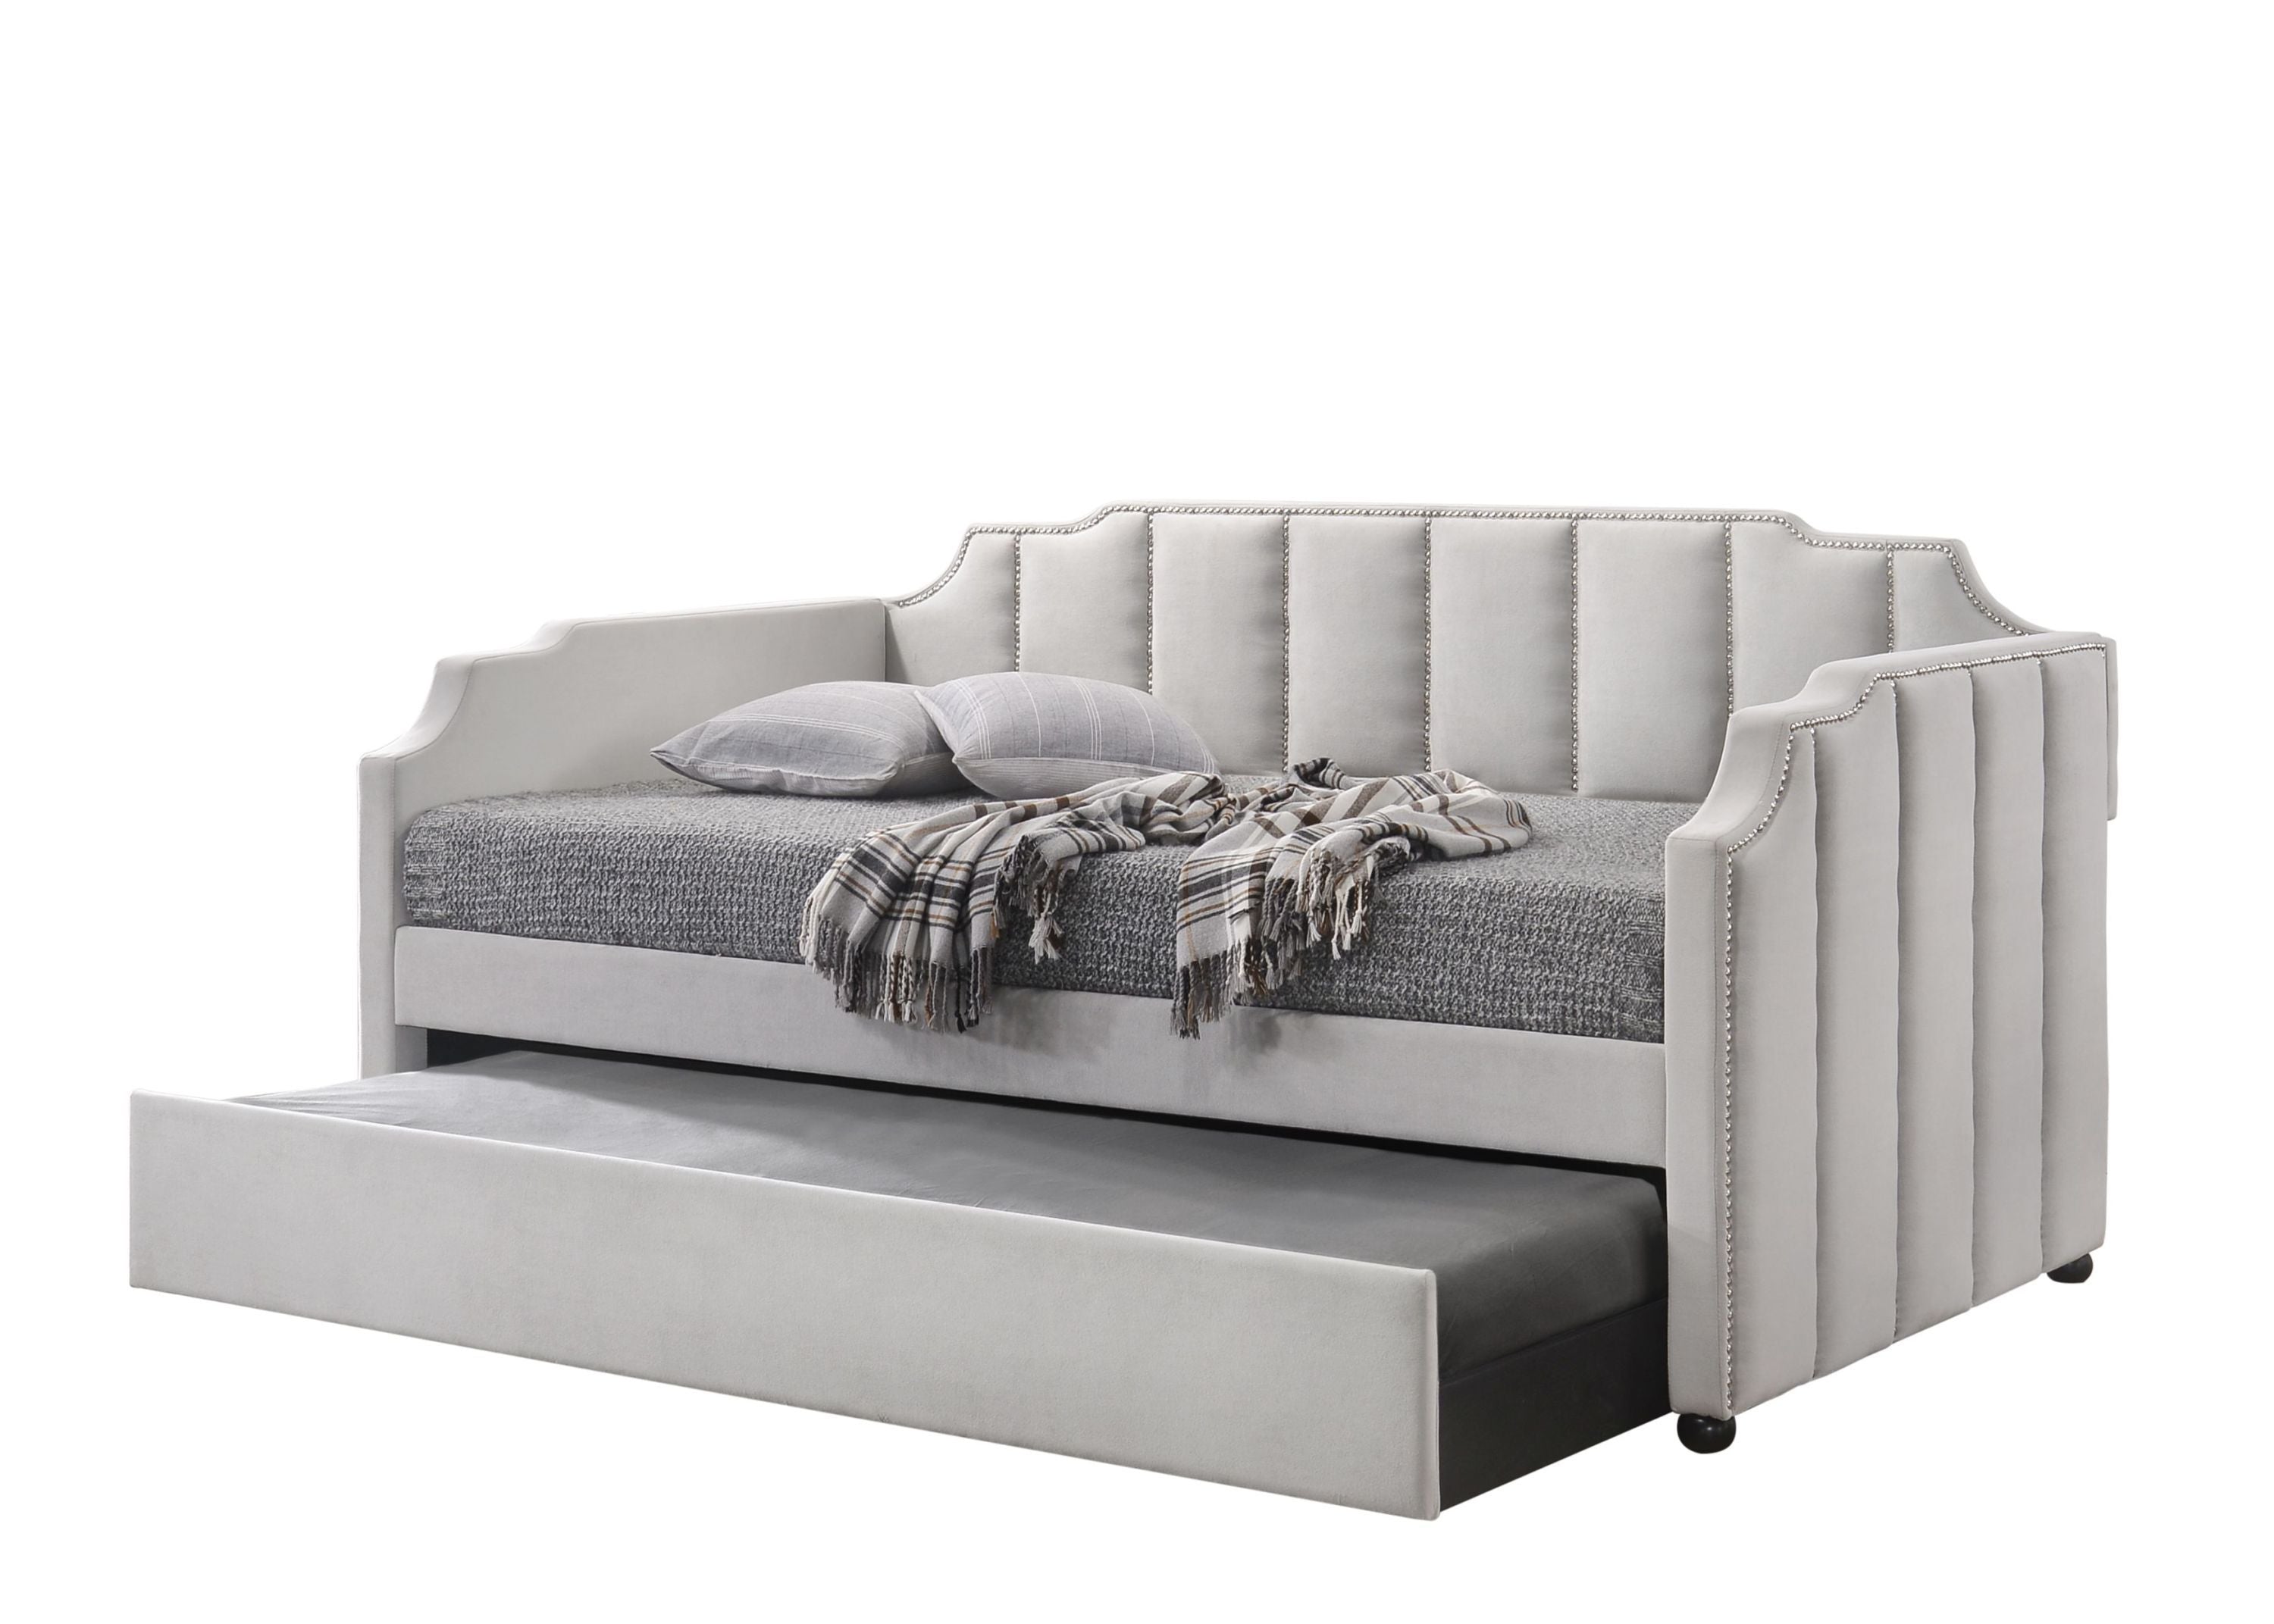 NOBLEMOOD Twin Size Daybed with Trundle, Velvet Day Bed Frame with Modern Line Design, No Box Spring Needed, Upholstered Sofa Bed with Roll-Out Trundle for Bedroom, Living Room, Guest Room, Dove Gray